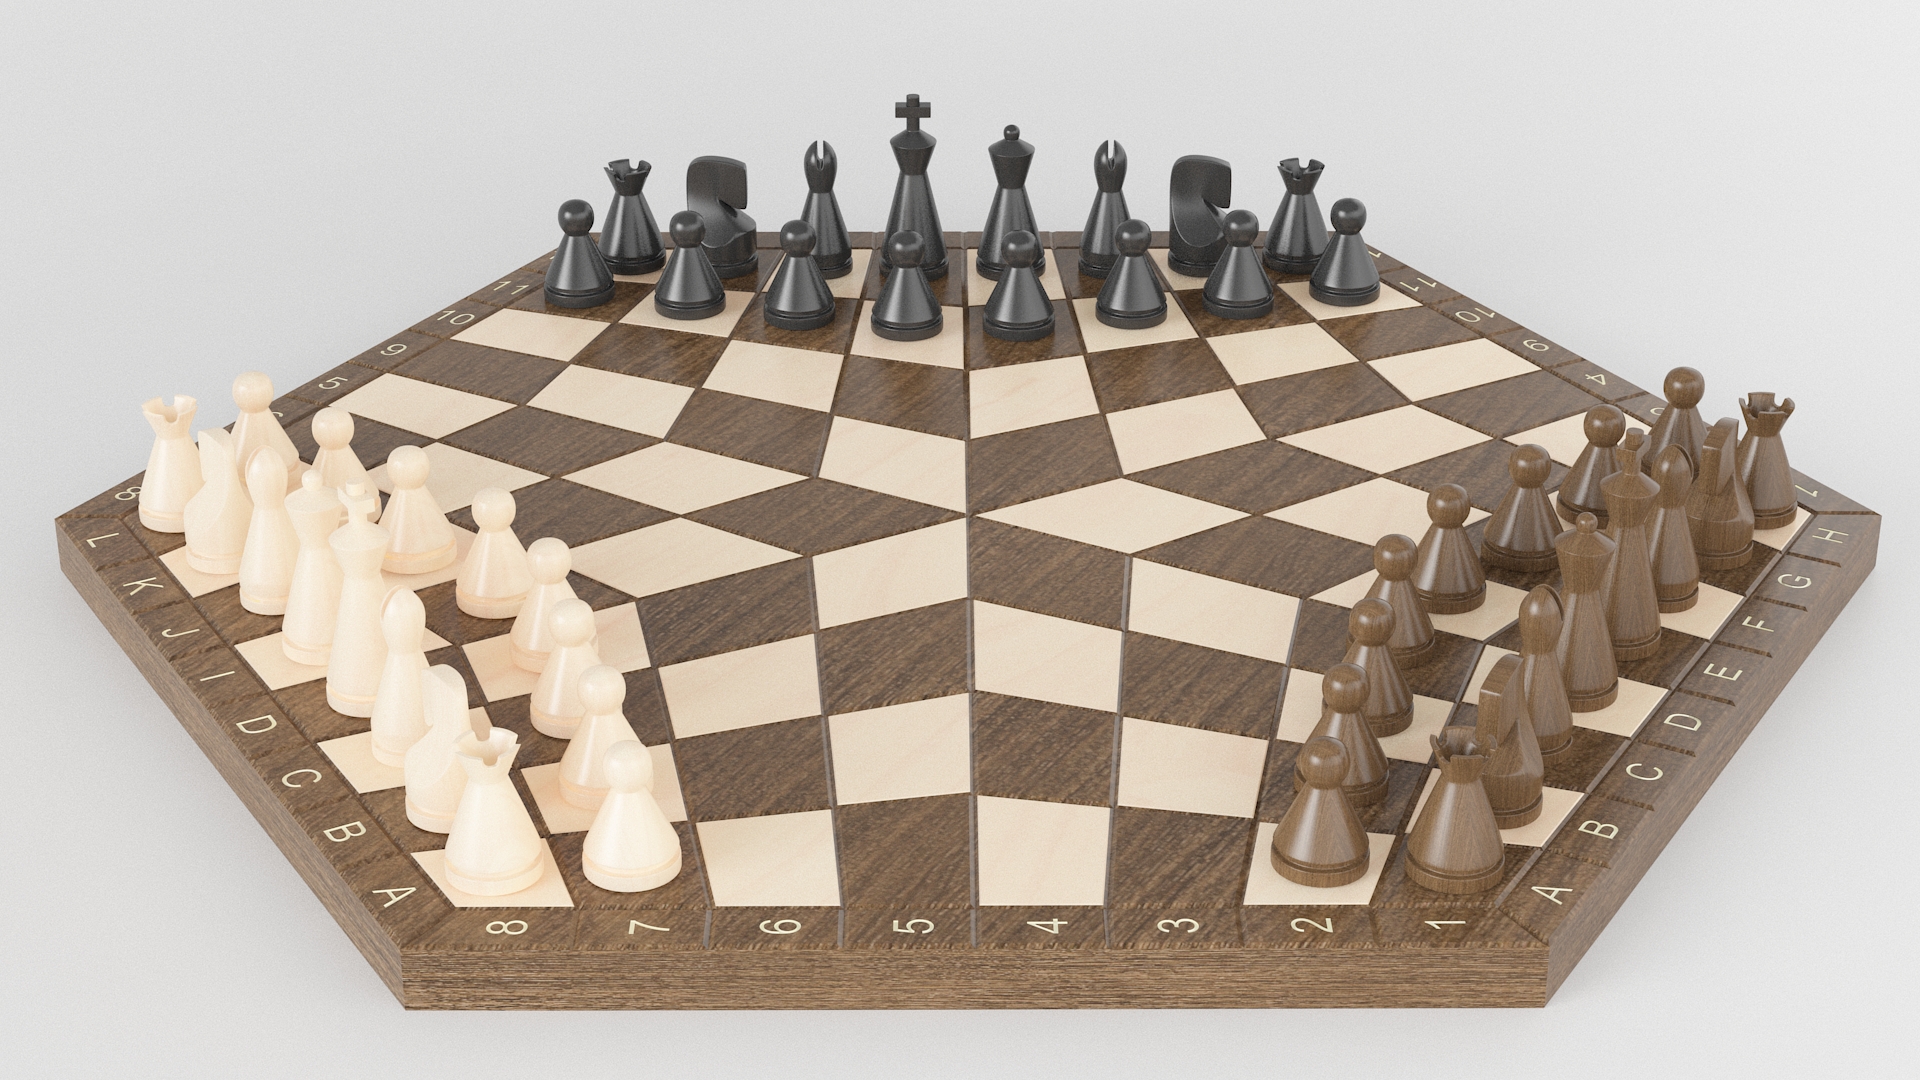 3-Chess.com update - Play three player chess online free for web